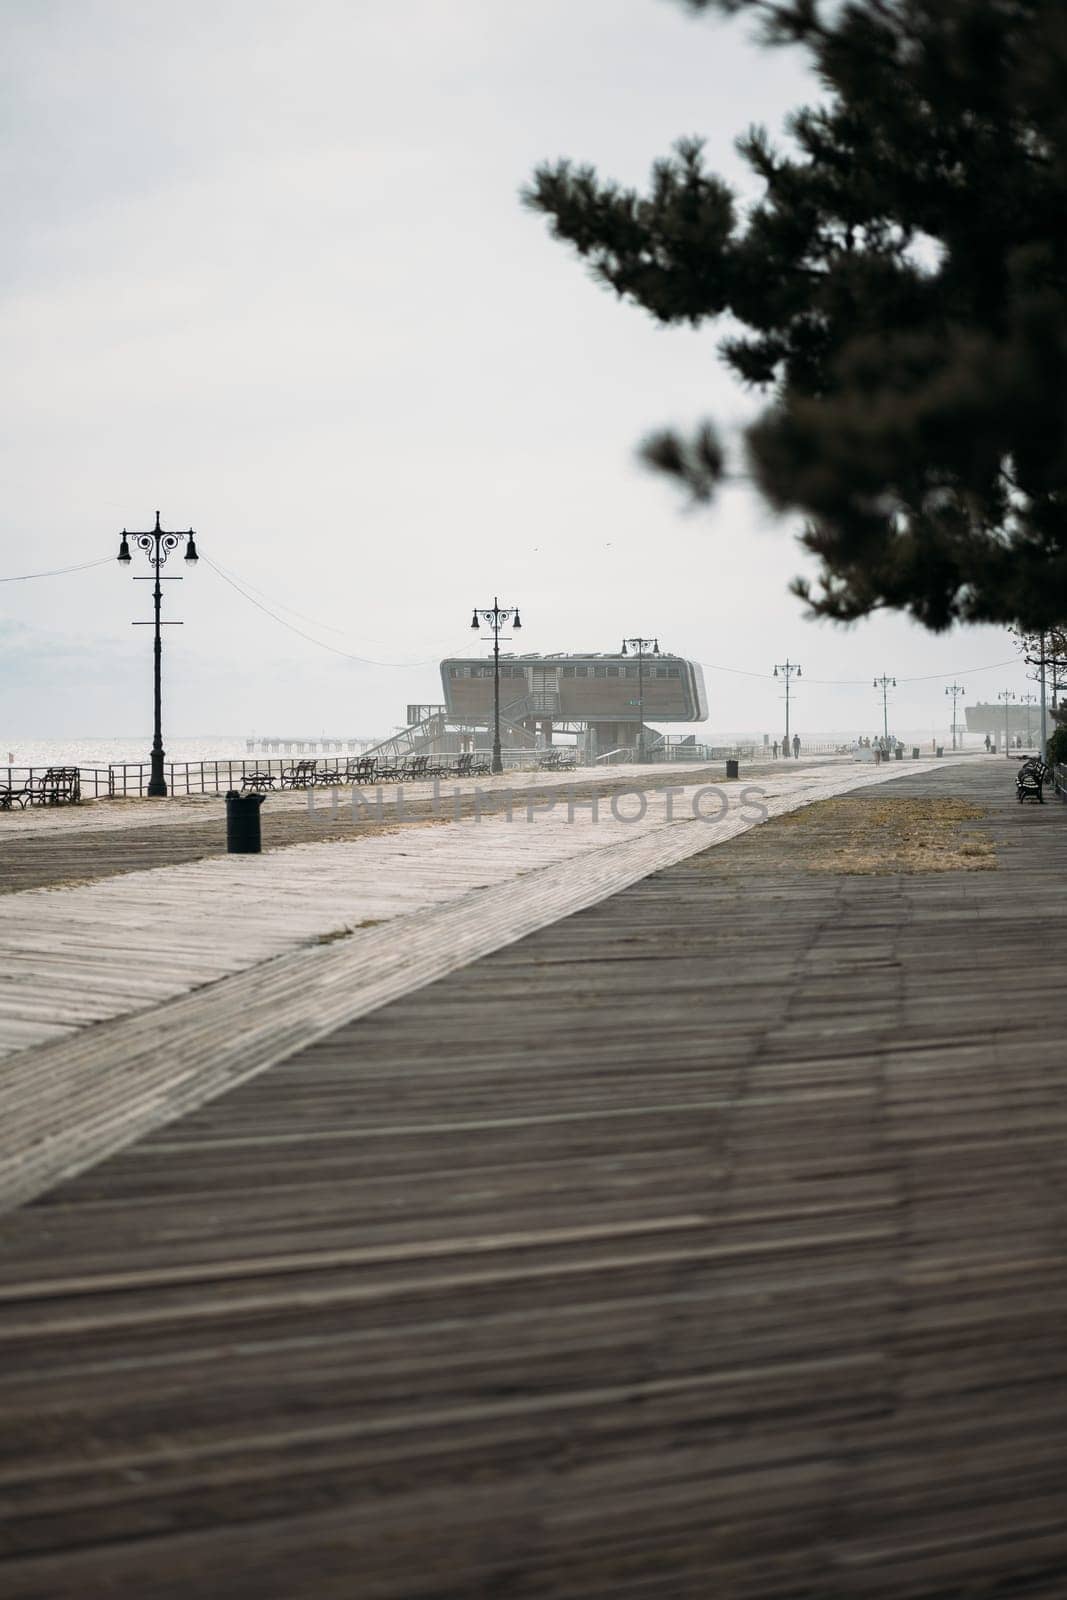 Desolate Boardwalk Leading to a Distant Building in New York by apavlin